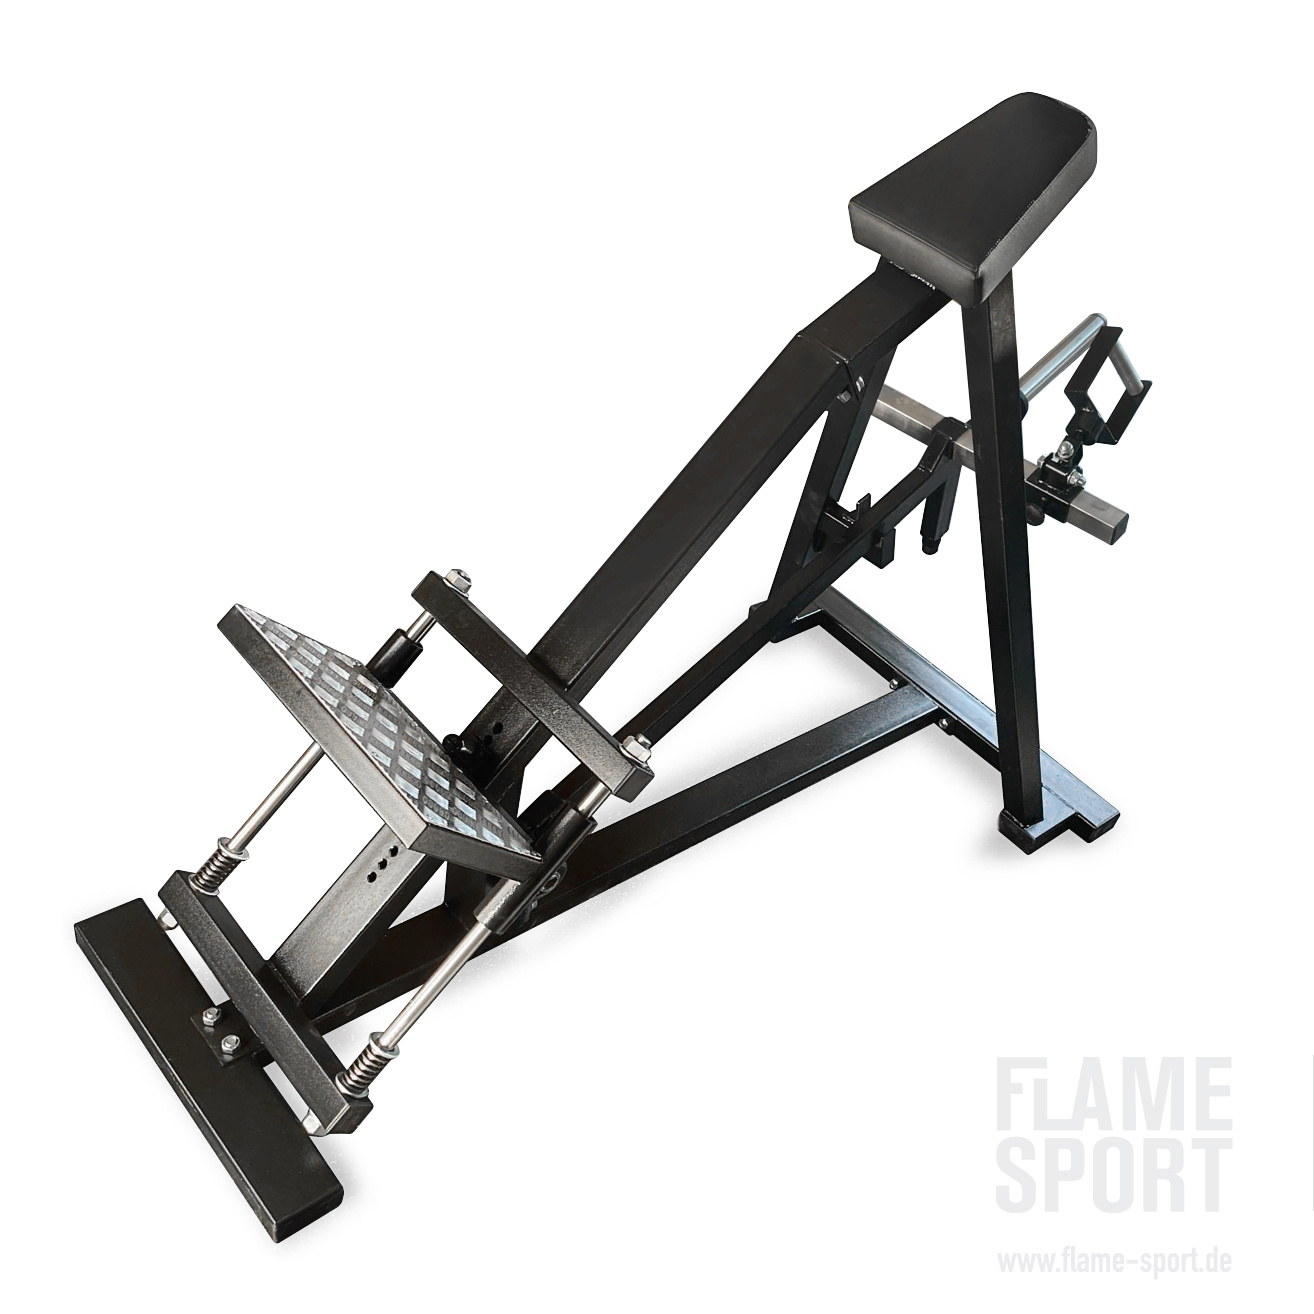 FLAME SPORT T-Bar Row Machine (1LXX ) with adjustable handles and foot platform - IN STOCK